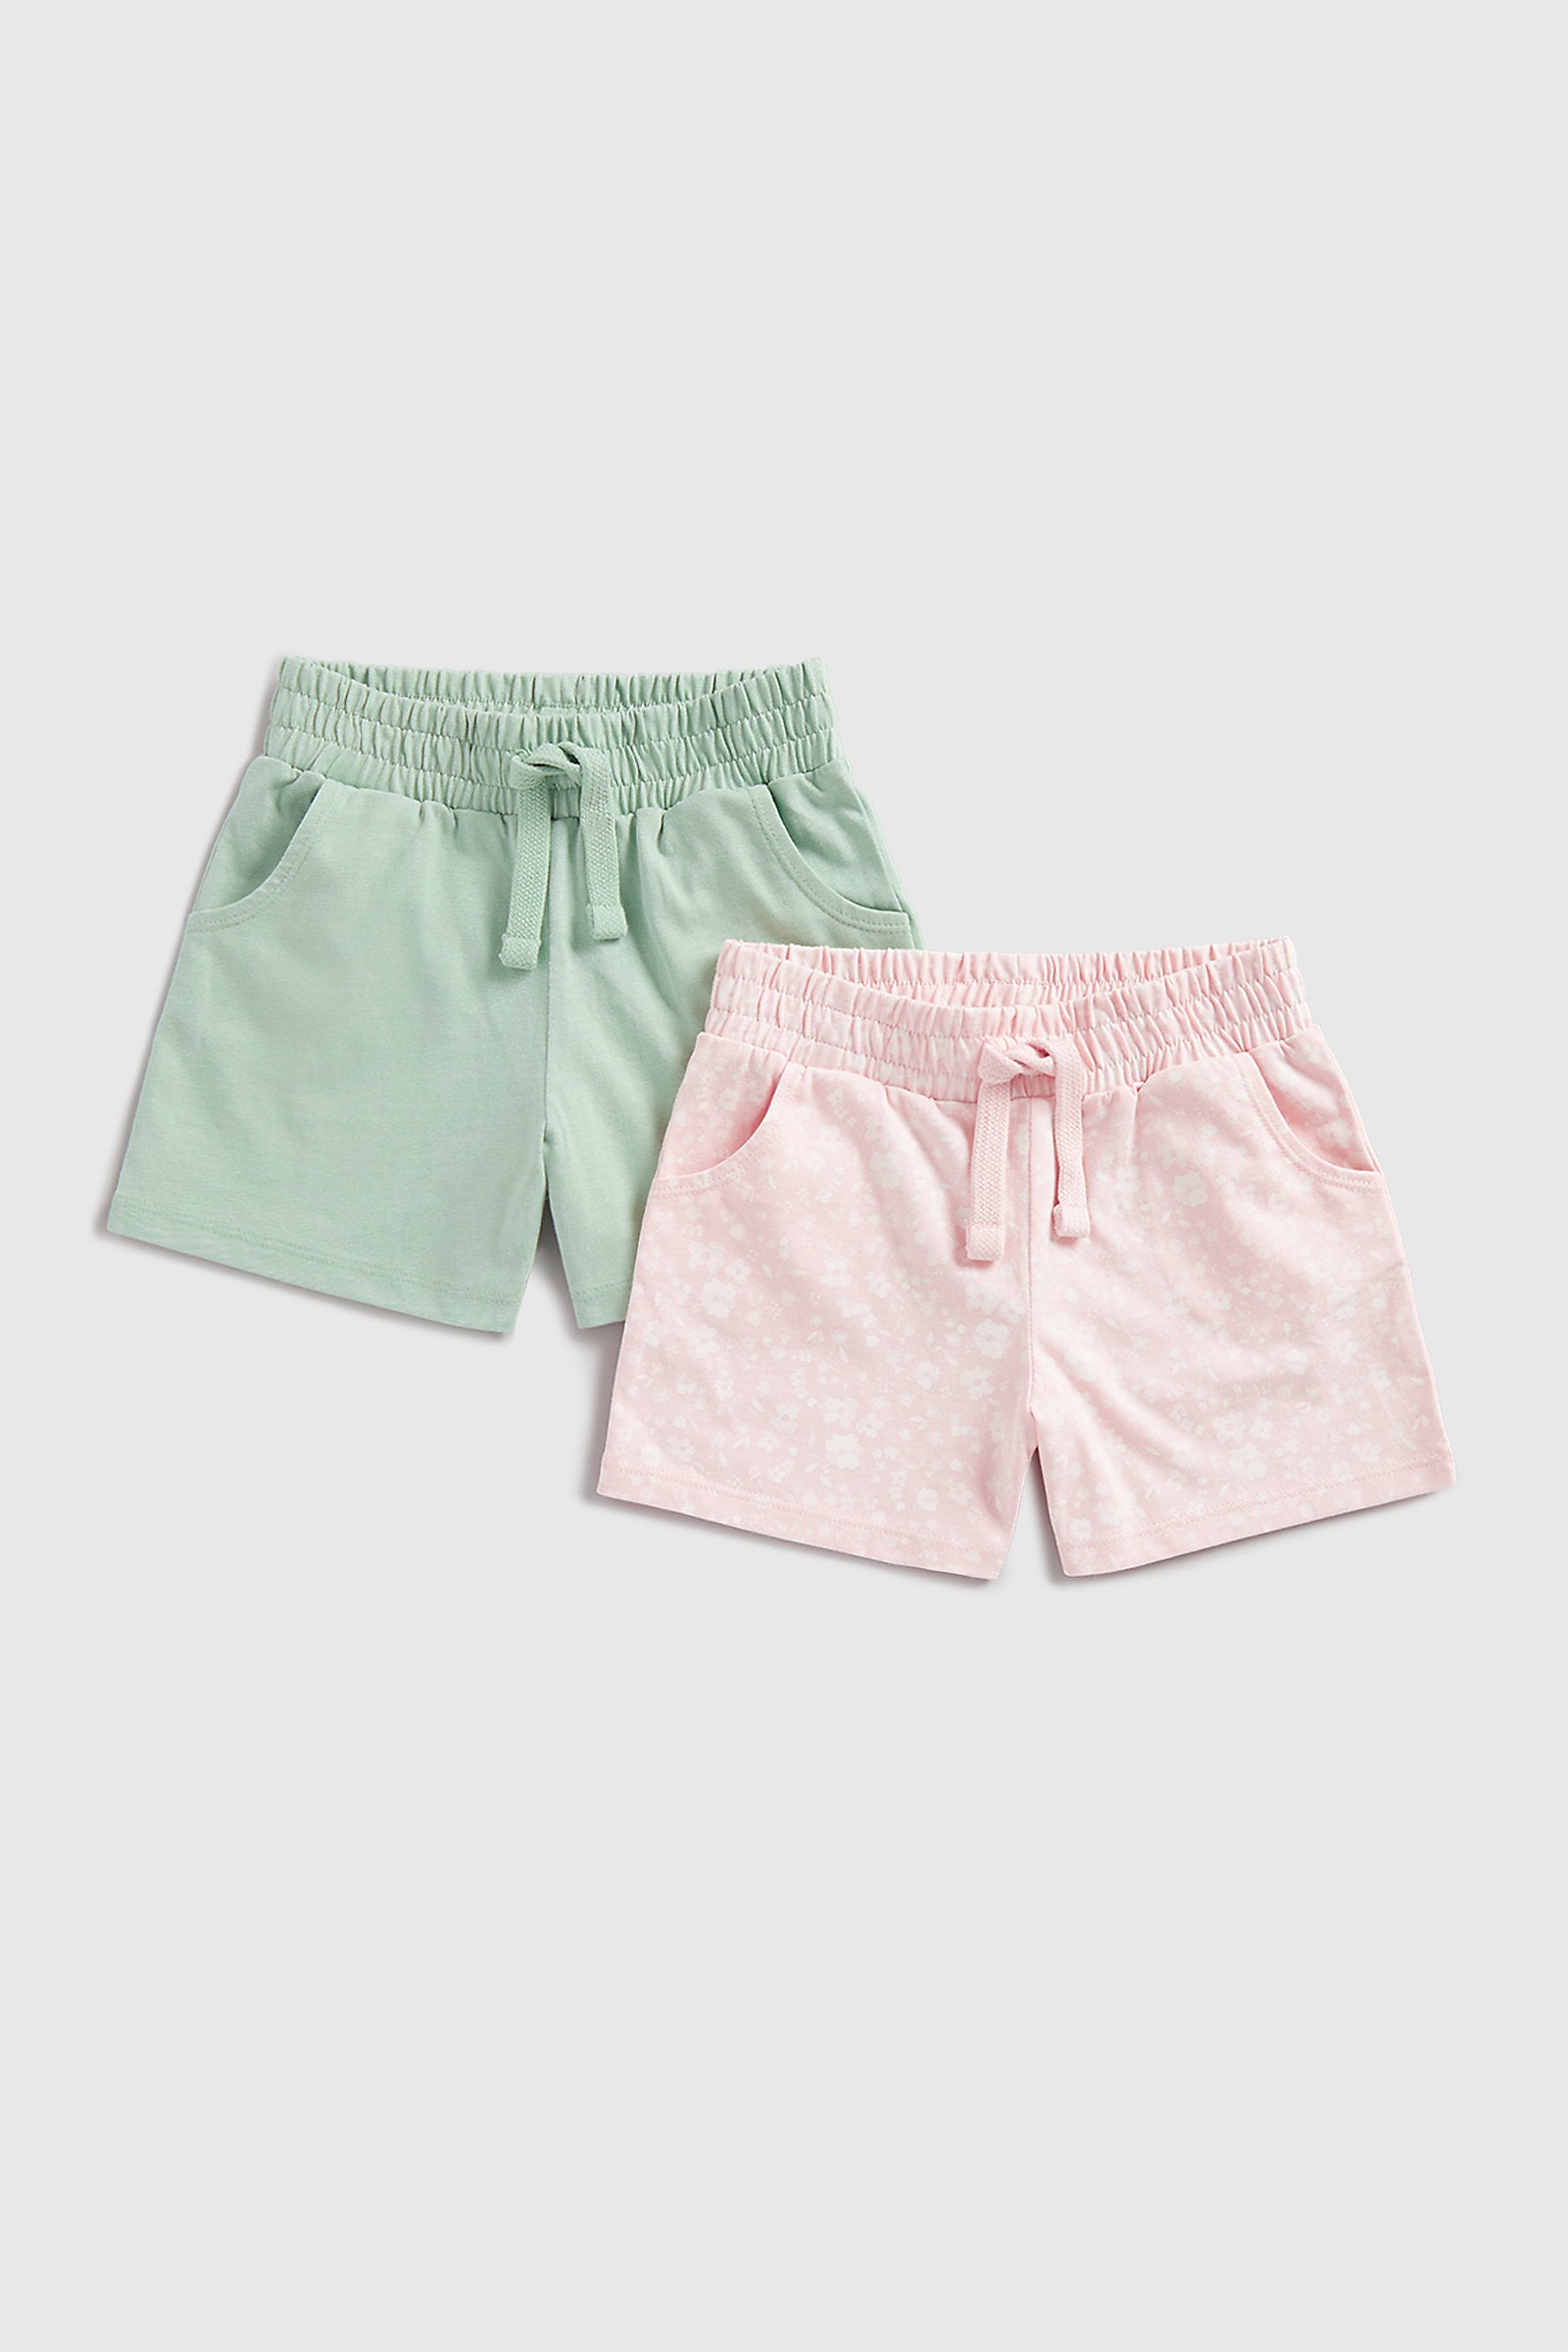 Mothercare Jersey Shorts - 2 Pack